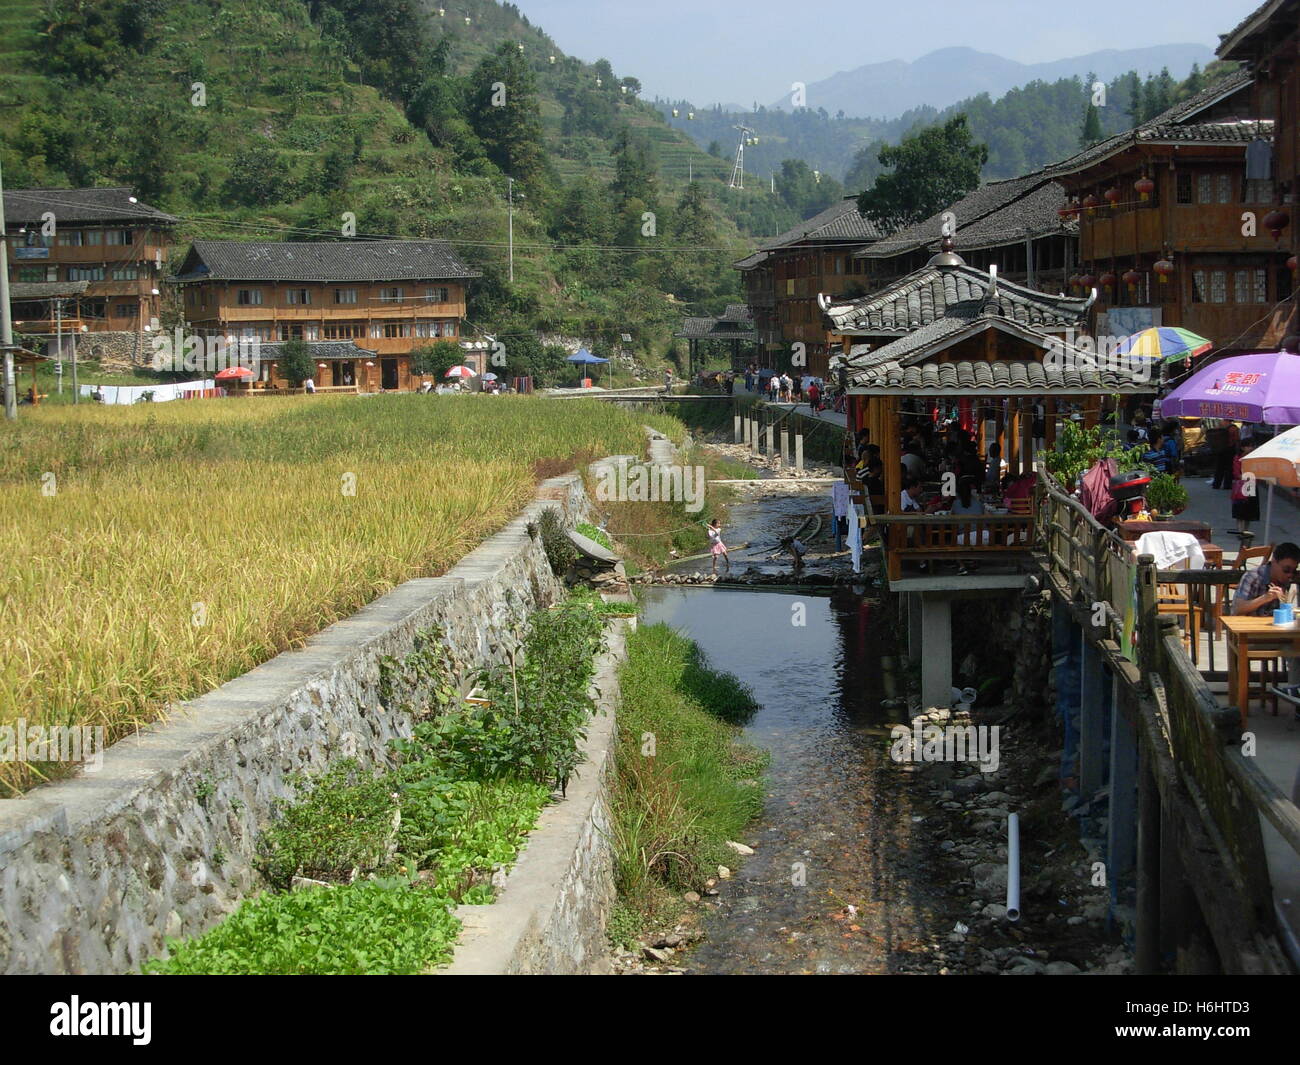 Wooden houses and small river inside Dazhai traditional village, Guilin, Guangxi province, China Stock Photo